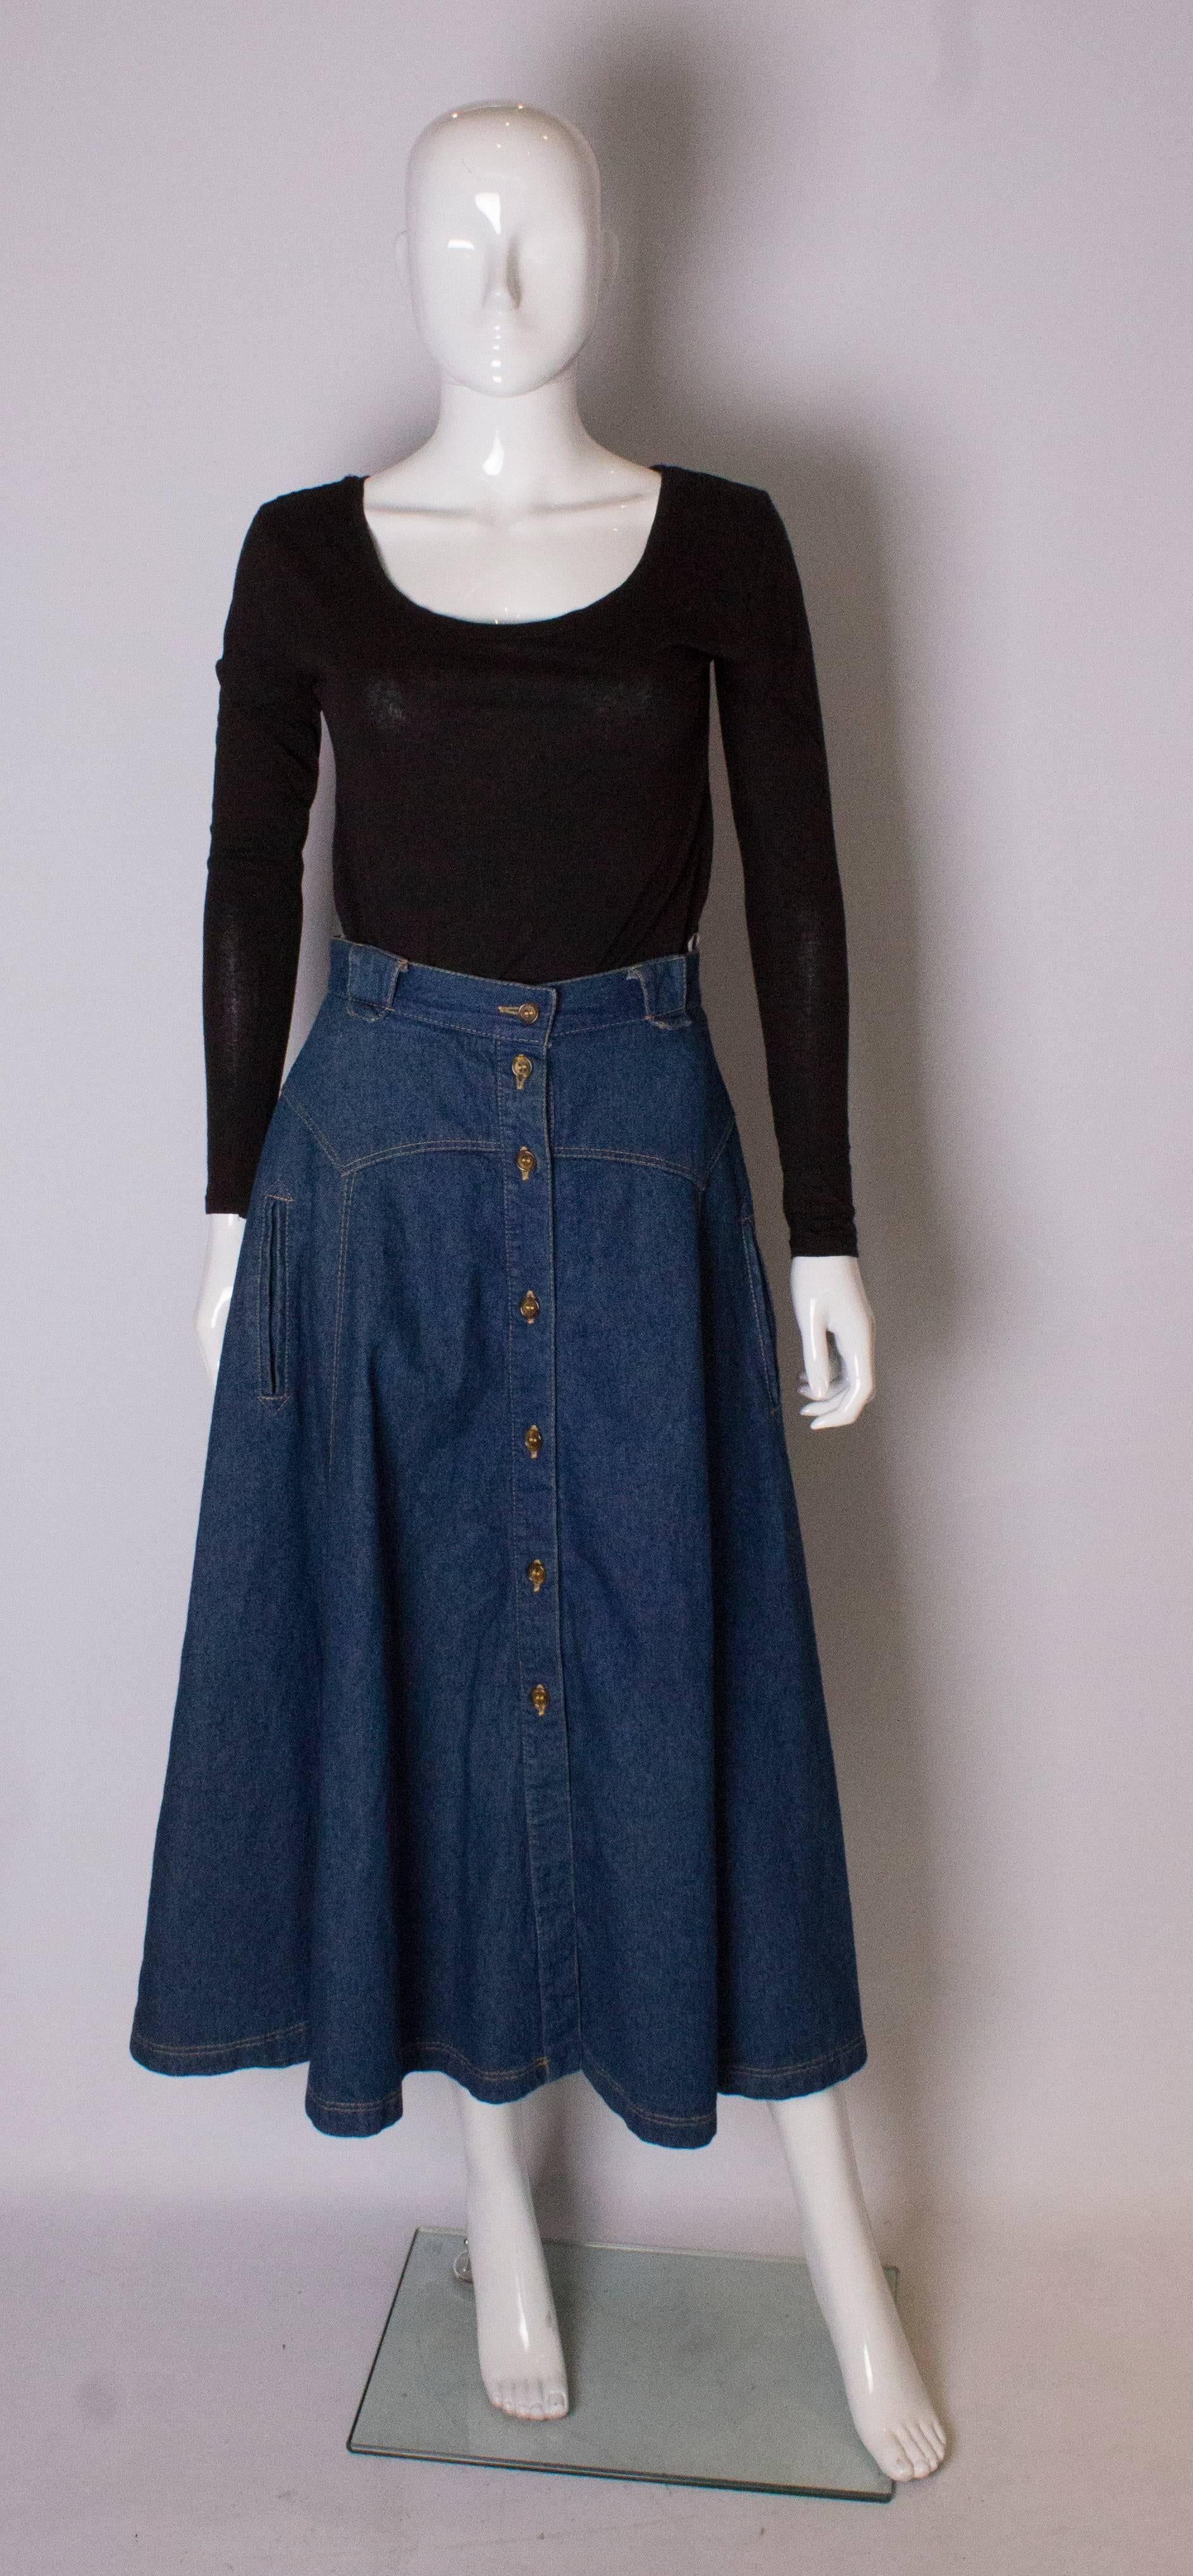 A great denim skirt from the 1970s. The skirt is panelled with decorative pockets on the front, belt hoops and a button through opening.